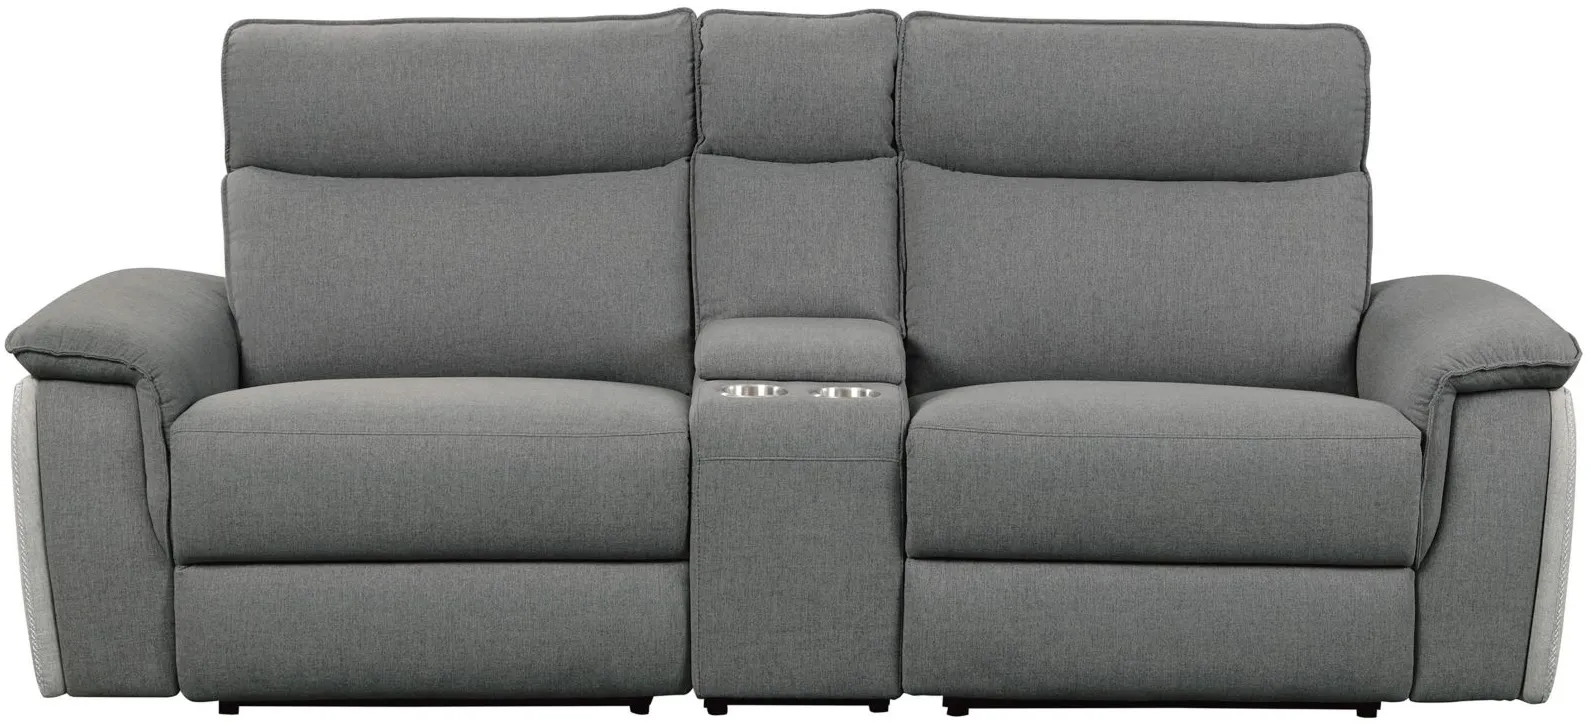 Ashton Power Double Reclining Love Seat w/Center Console and Power Headrests in 2-Tone Gray by Homelegance